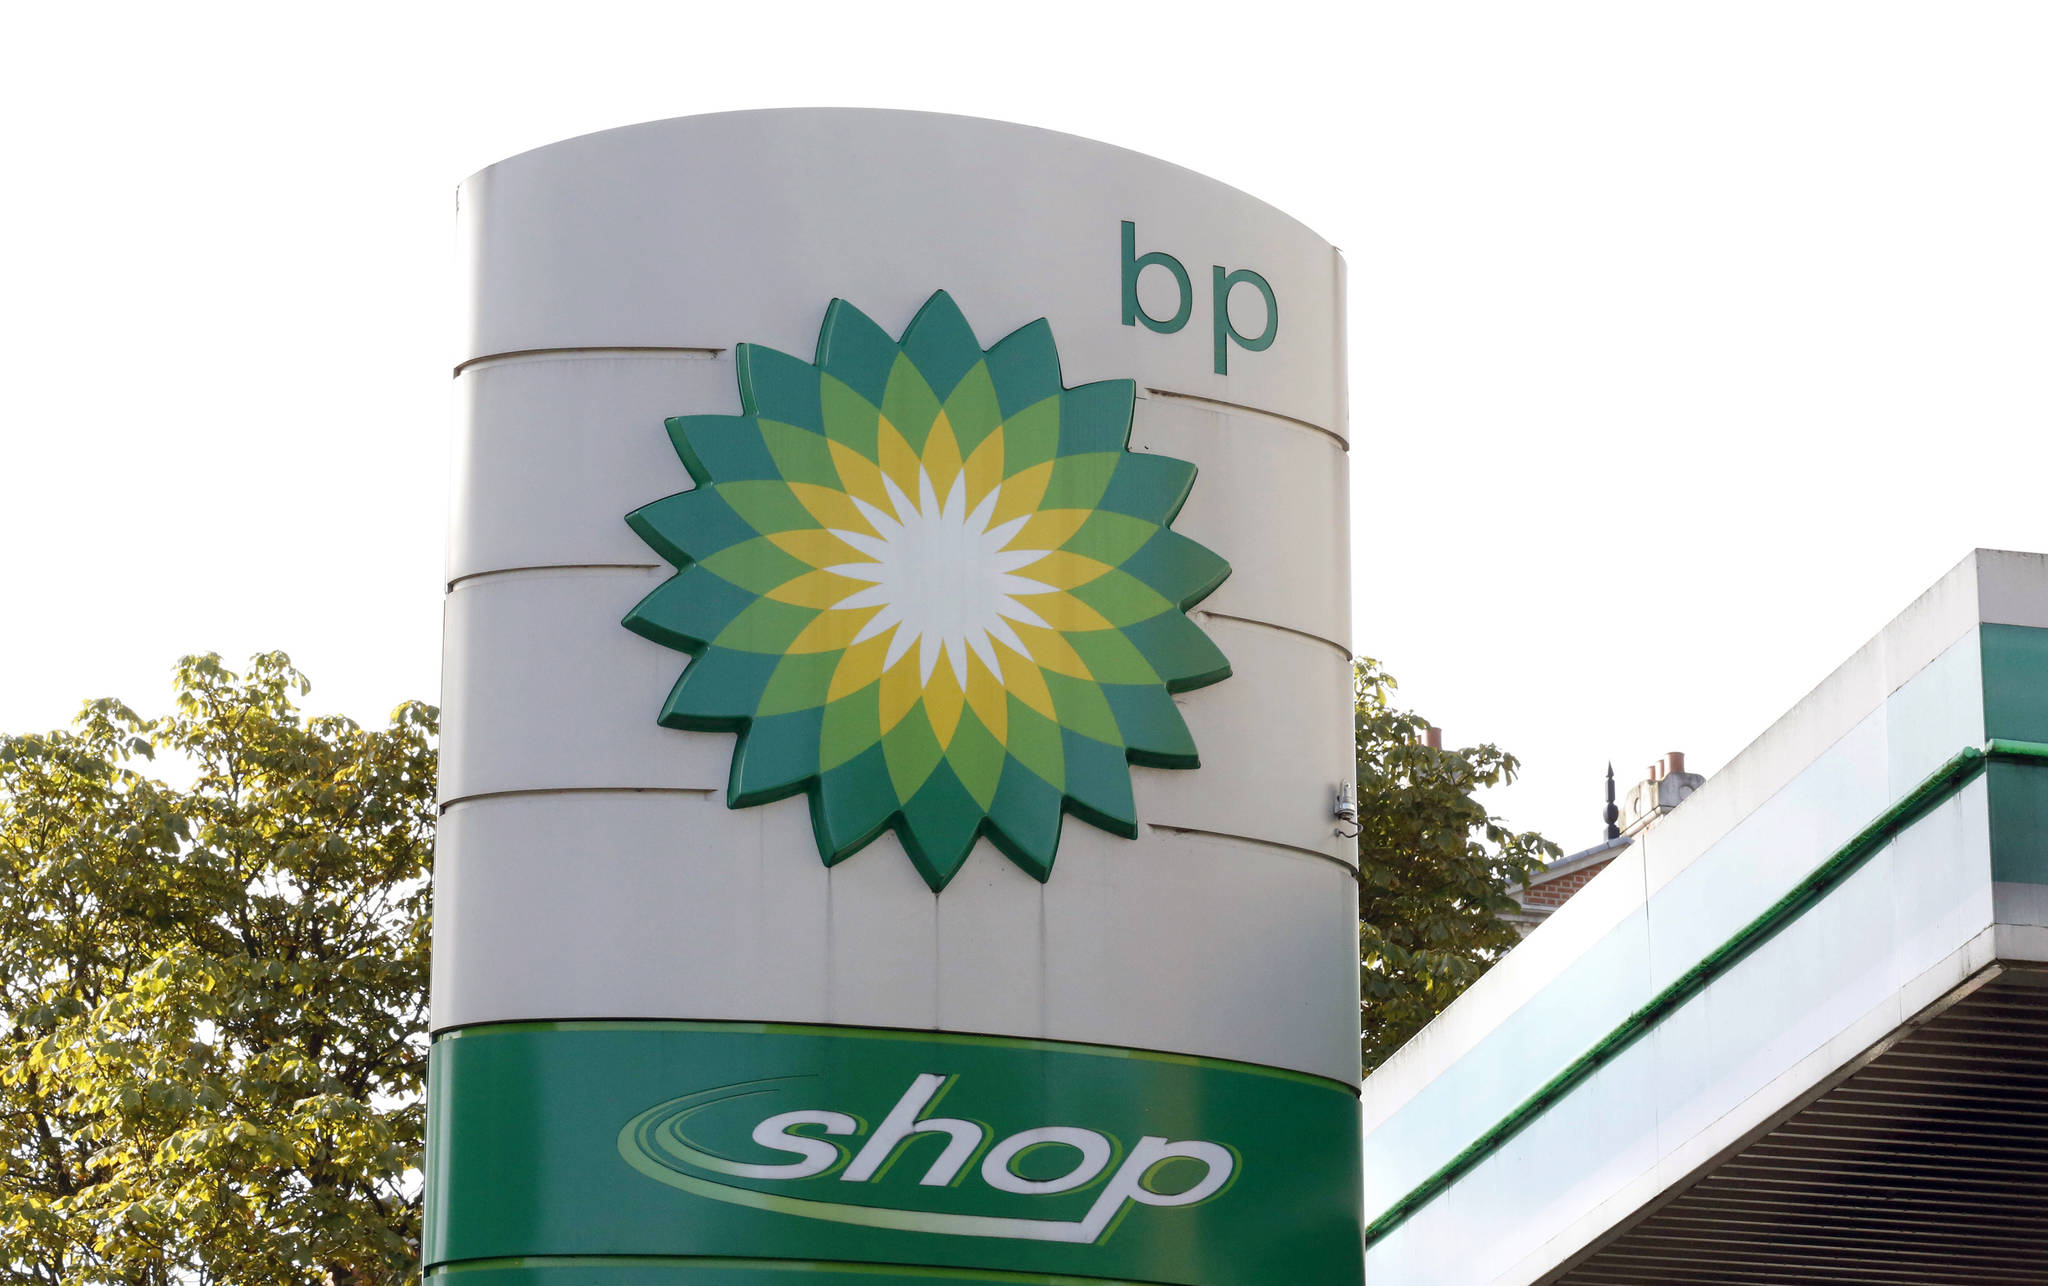 This Aug. 1, 2017, file photo shows the oil producer BP company logo at a petrol station in London. (AP Photo/Caroline Spiezio, File)